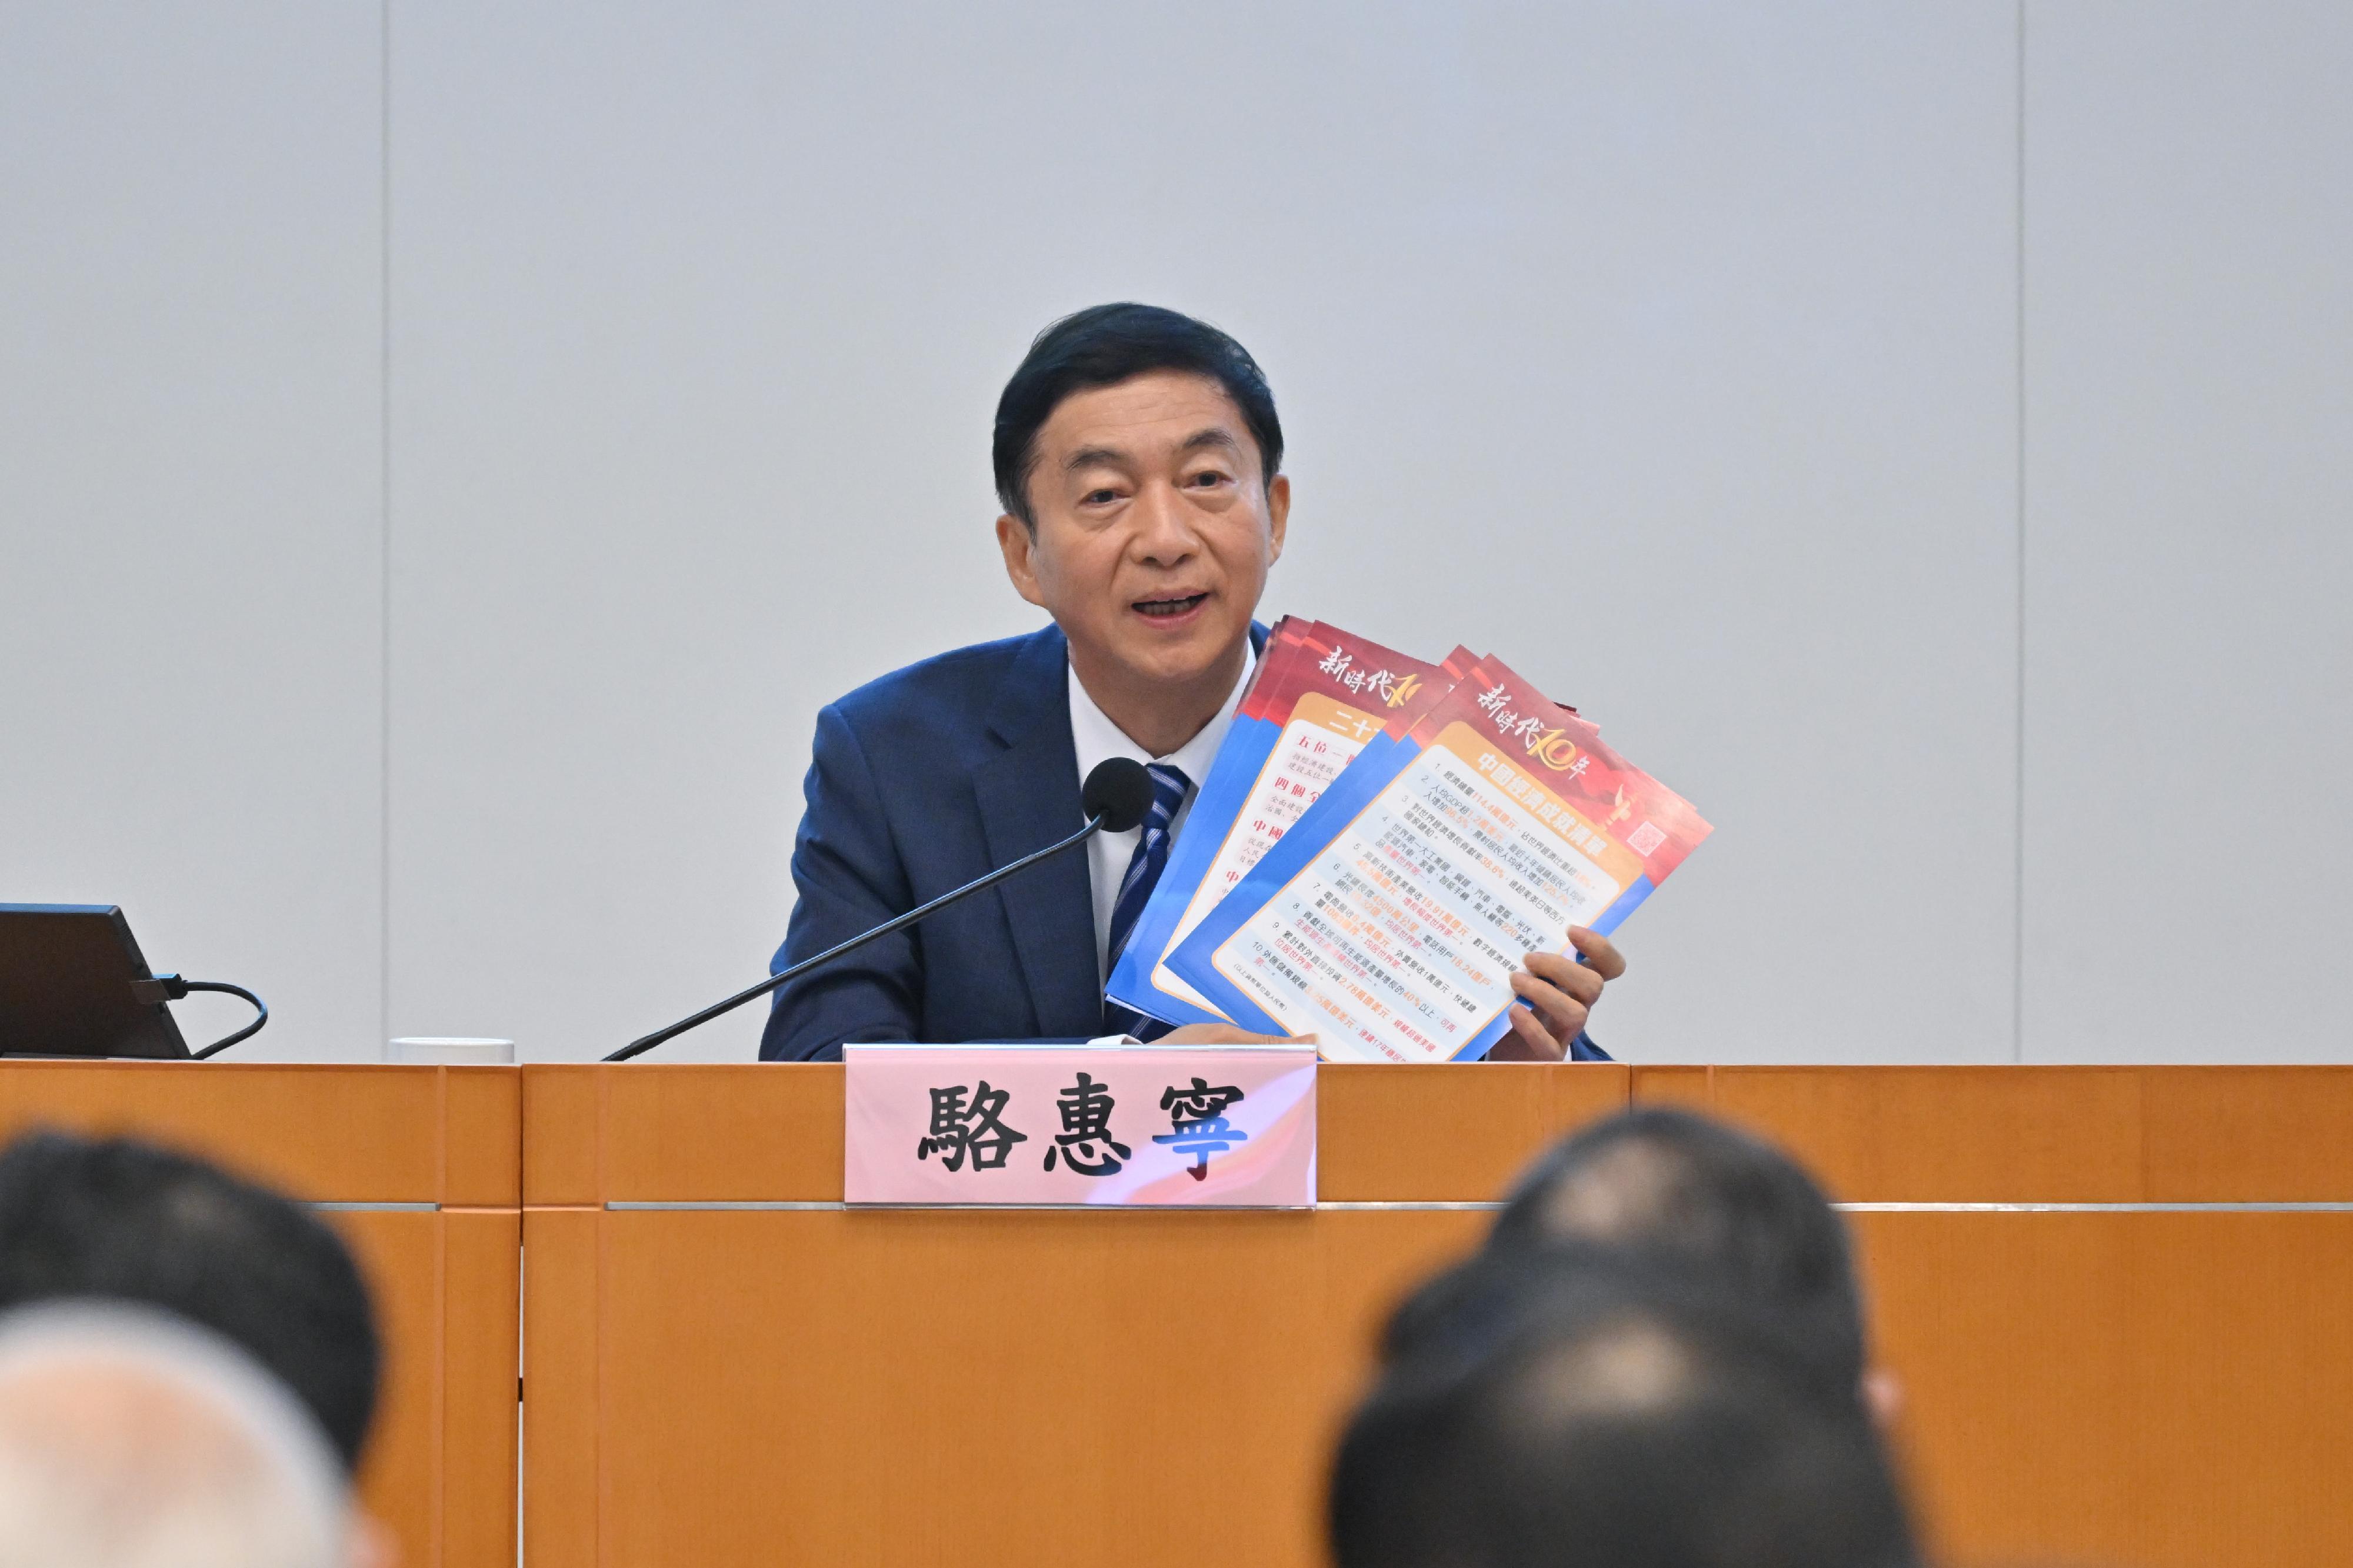 The Hong Kong Special Administrative Region (HKSAR) Government today (November 16) held a sharing session on the spirit of the 20th National Congress of the Communist Party of China at the Central Government Offices. Photo shows the Director of the Liaison Office of the Central People's Government in the HKSAR, Mr Luo Huining, sharing his views.